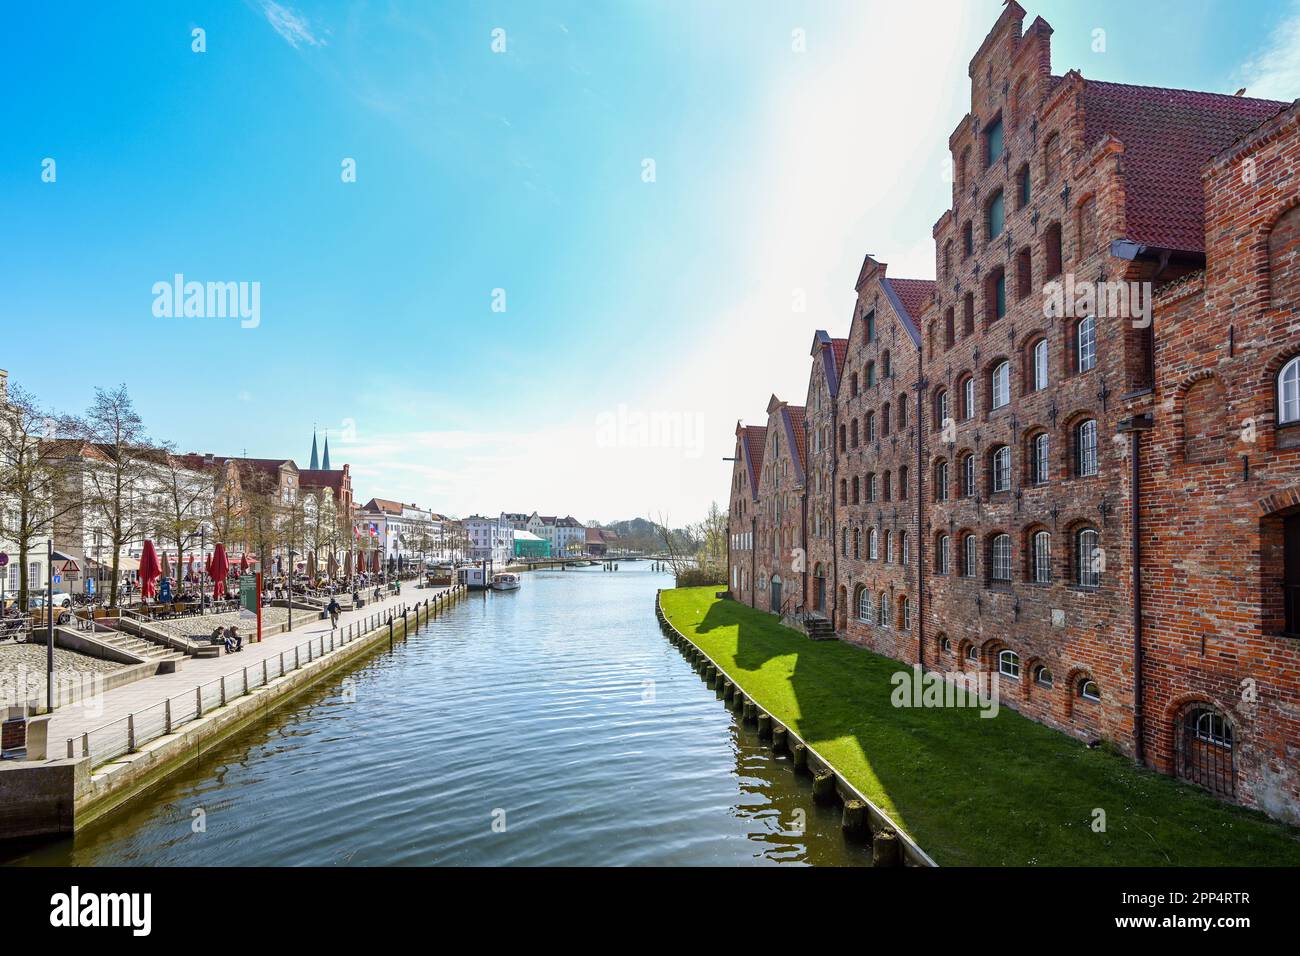 Lubeck, Germany, April 17, 2023: Historic salt store buildings and promenade with cafes on the banks of the river Trave in the old town of Luebeck, to Stock Photo